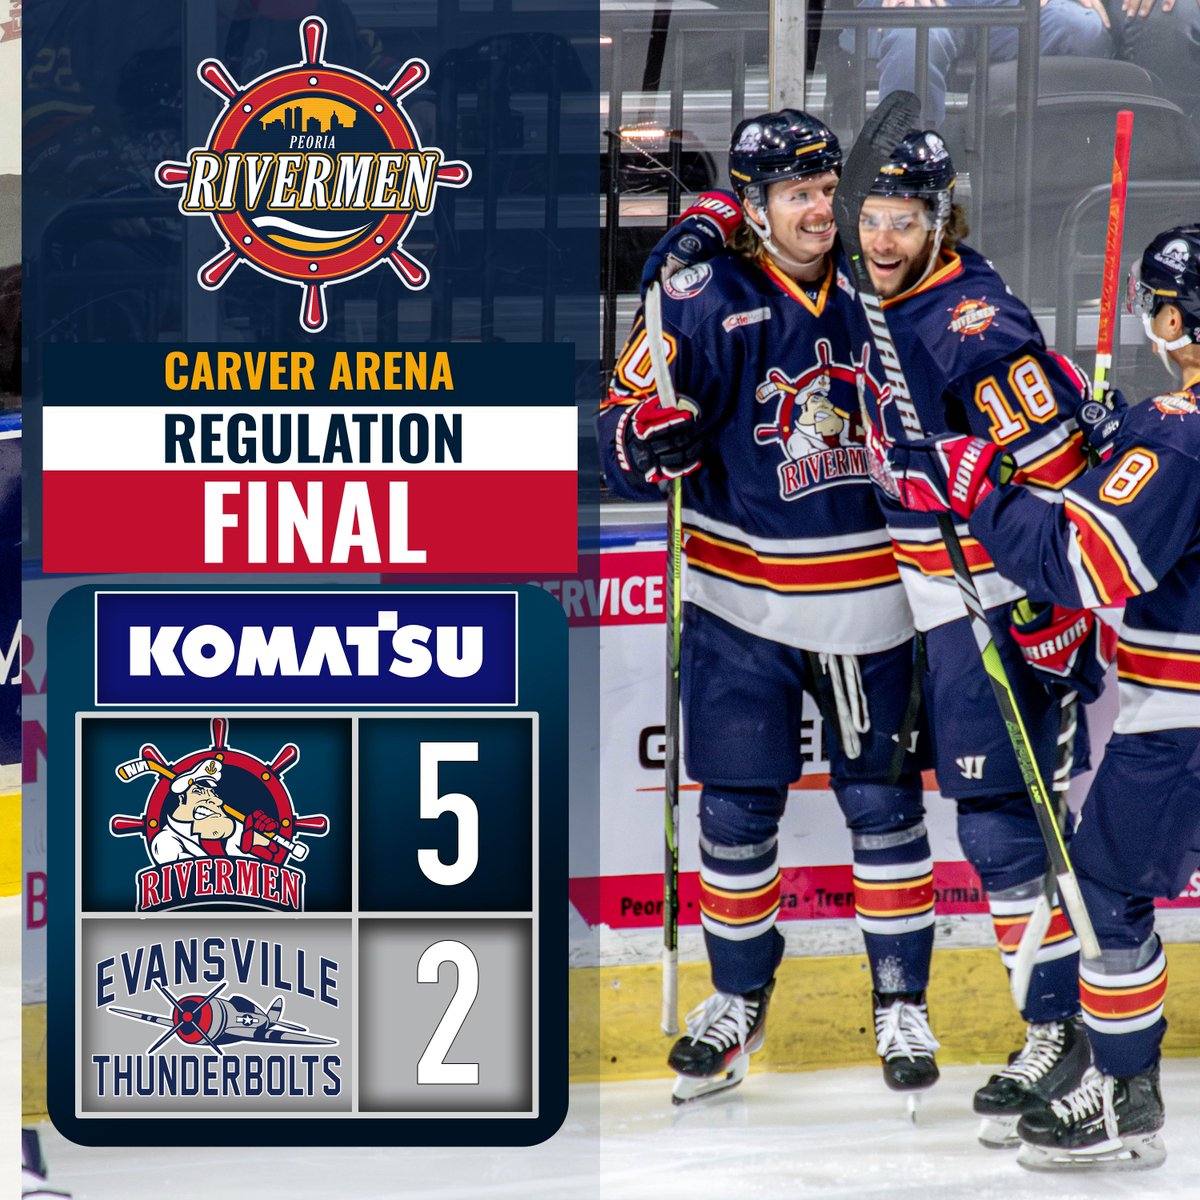 For the second time in three years, the Rivermen are going to the President's Cup Final!
SOG: 35-18 PEO
#HoistTheColors